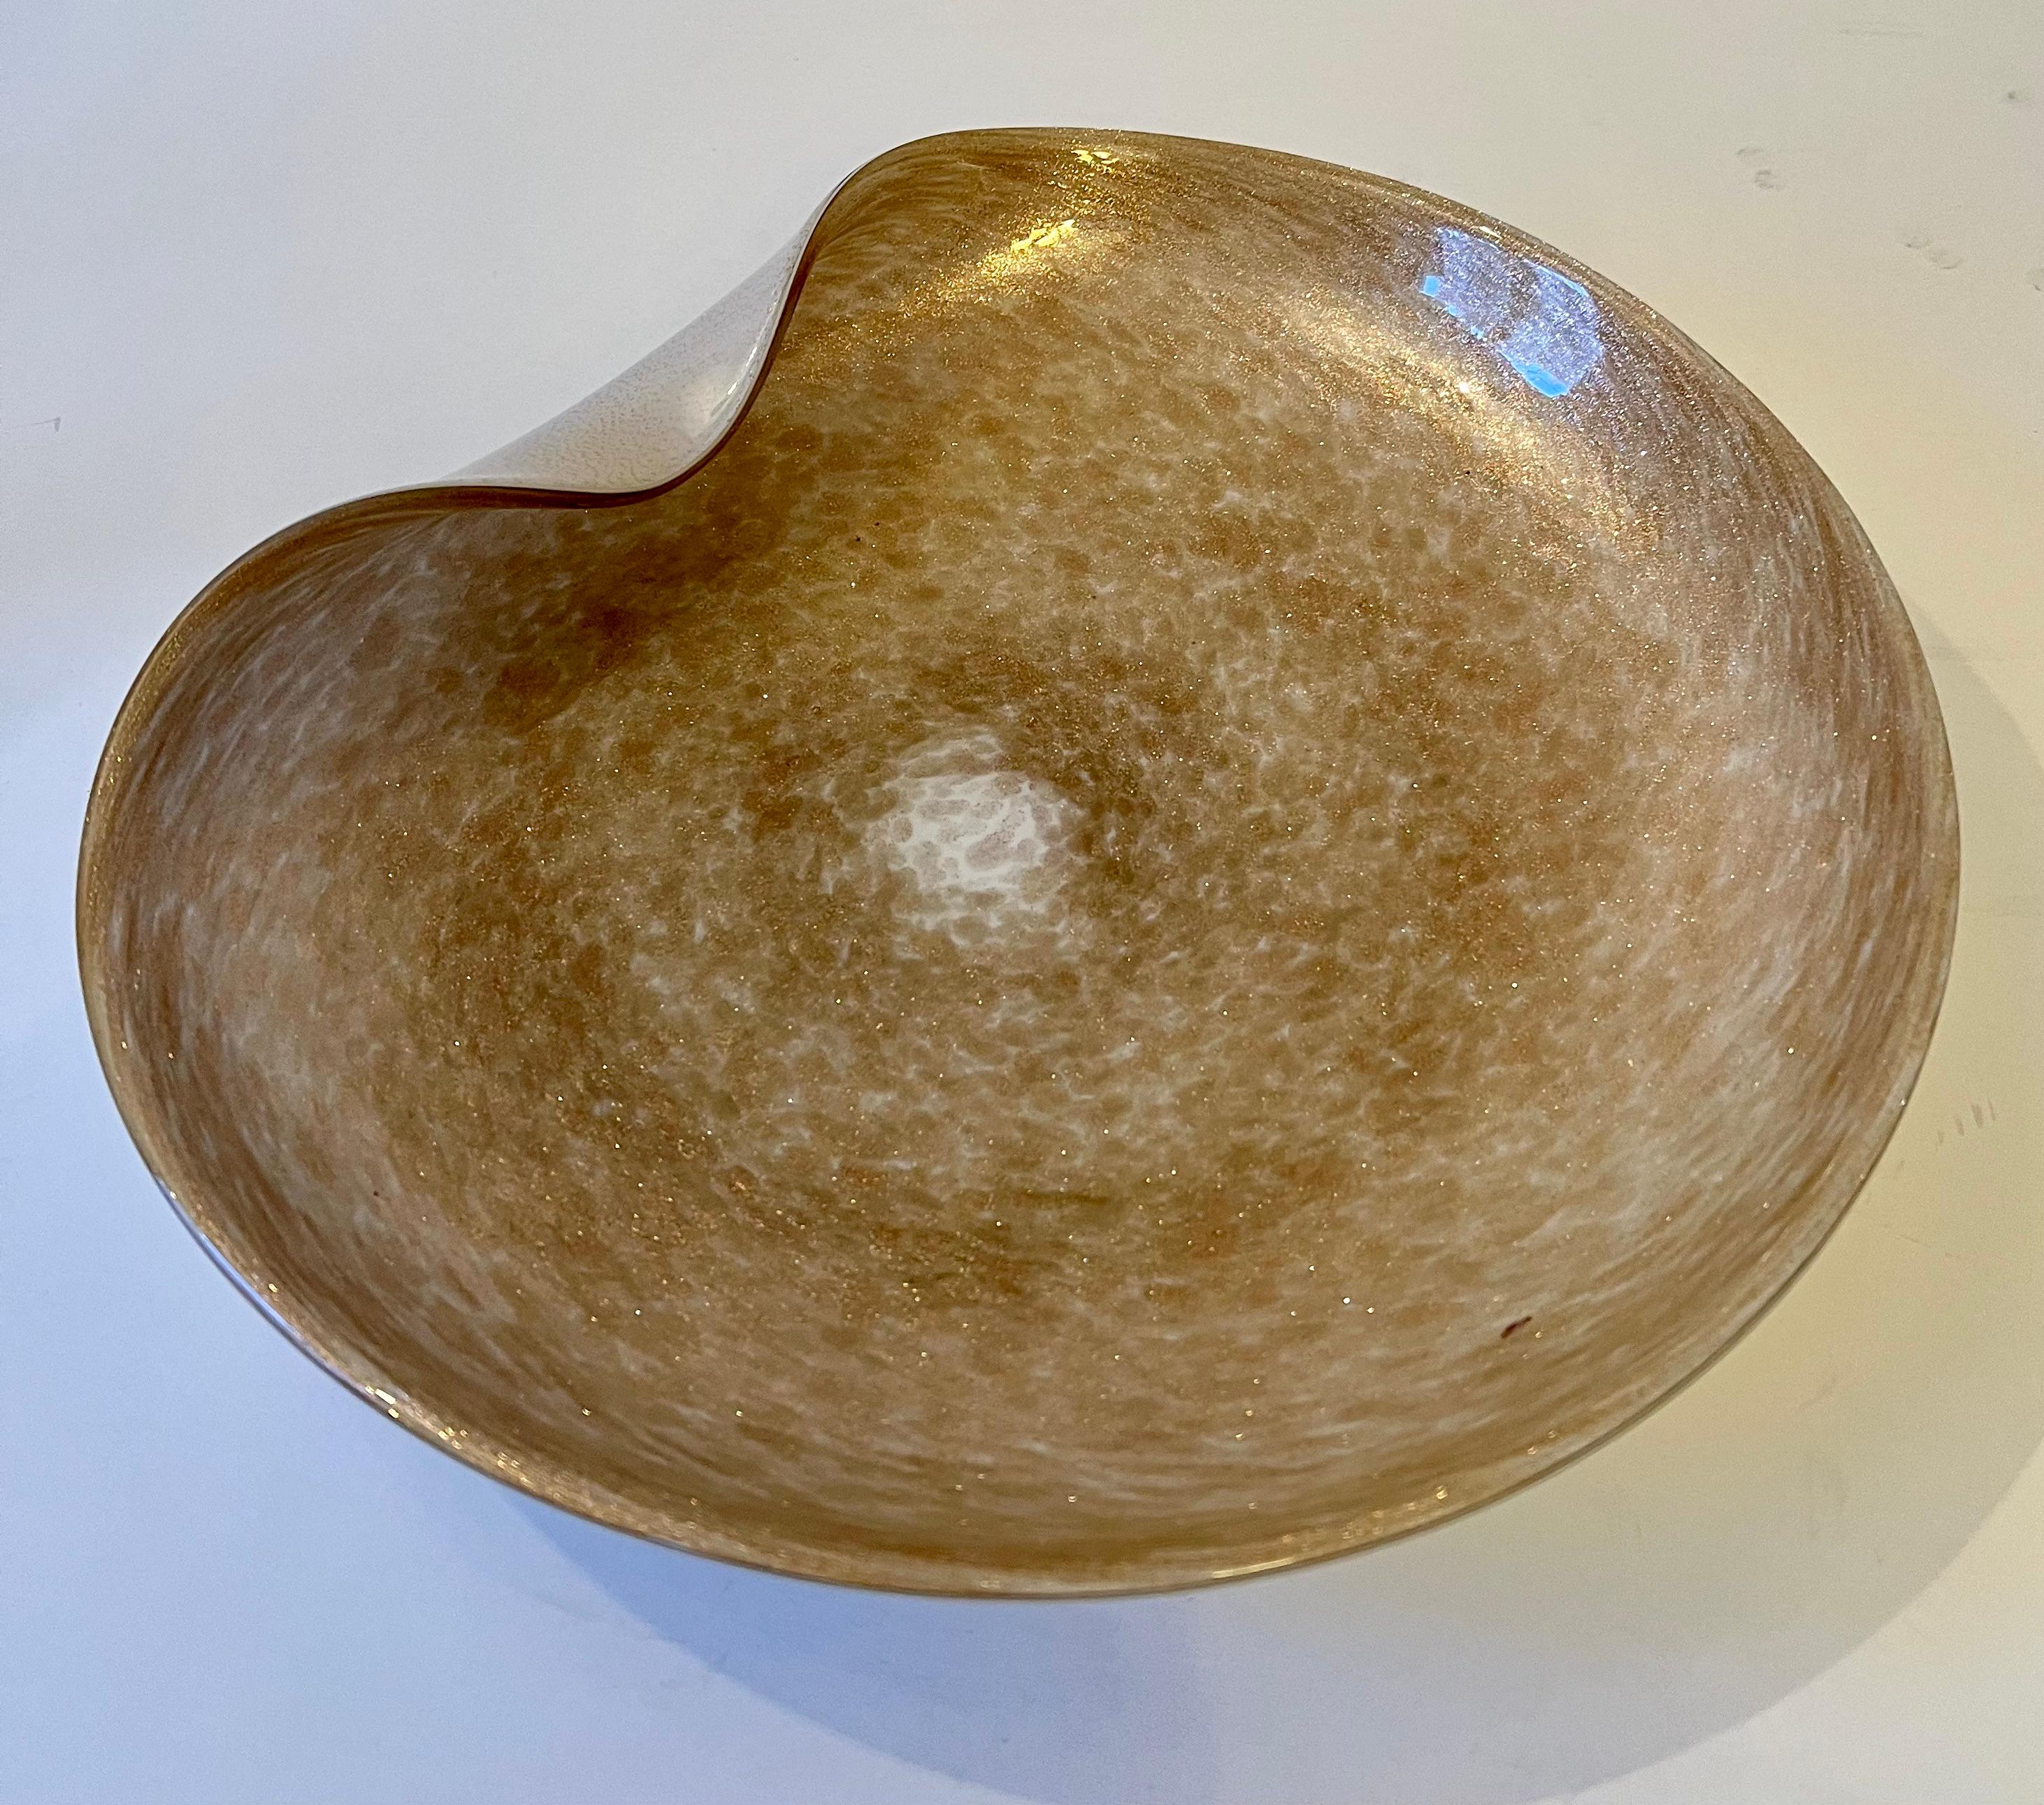 A lovely Glass Murano bowl or platter - a compliment to any cocktail table as a functional piece or decorative item. A curve of opaque white glass wraps up to the top, with gold flecks in the glass this piece is an impressive conversation starter.